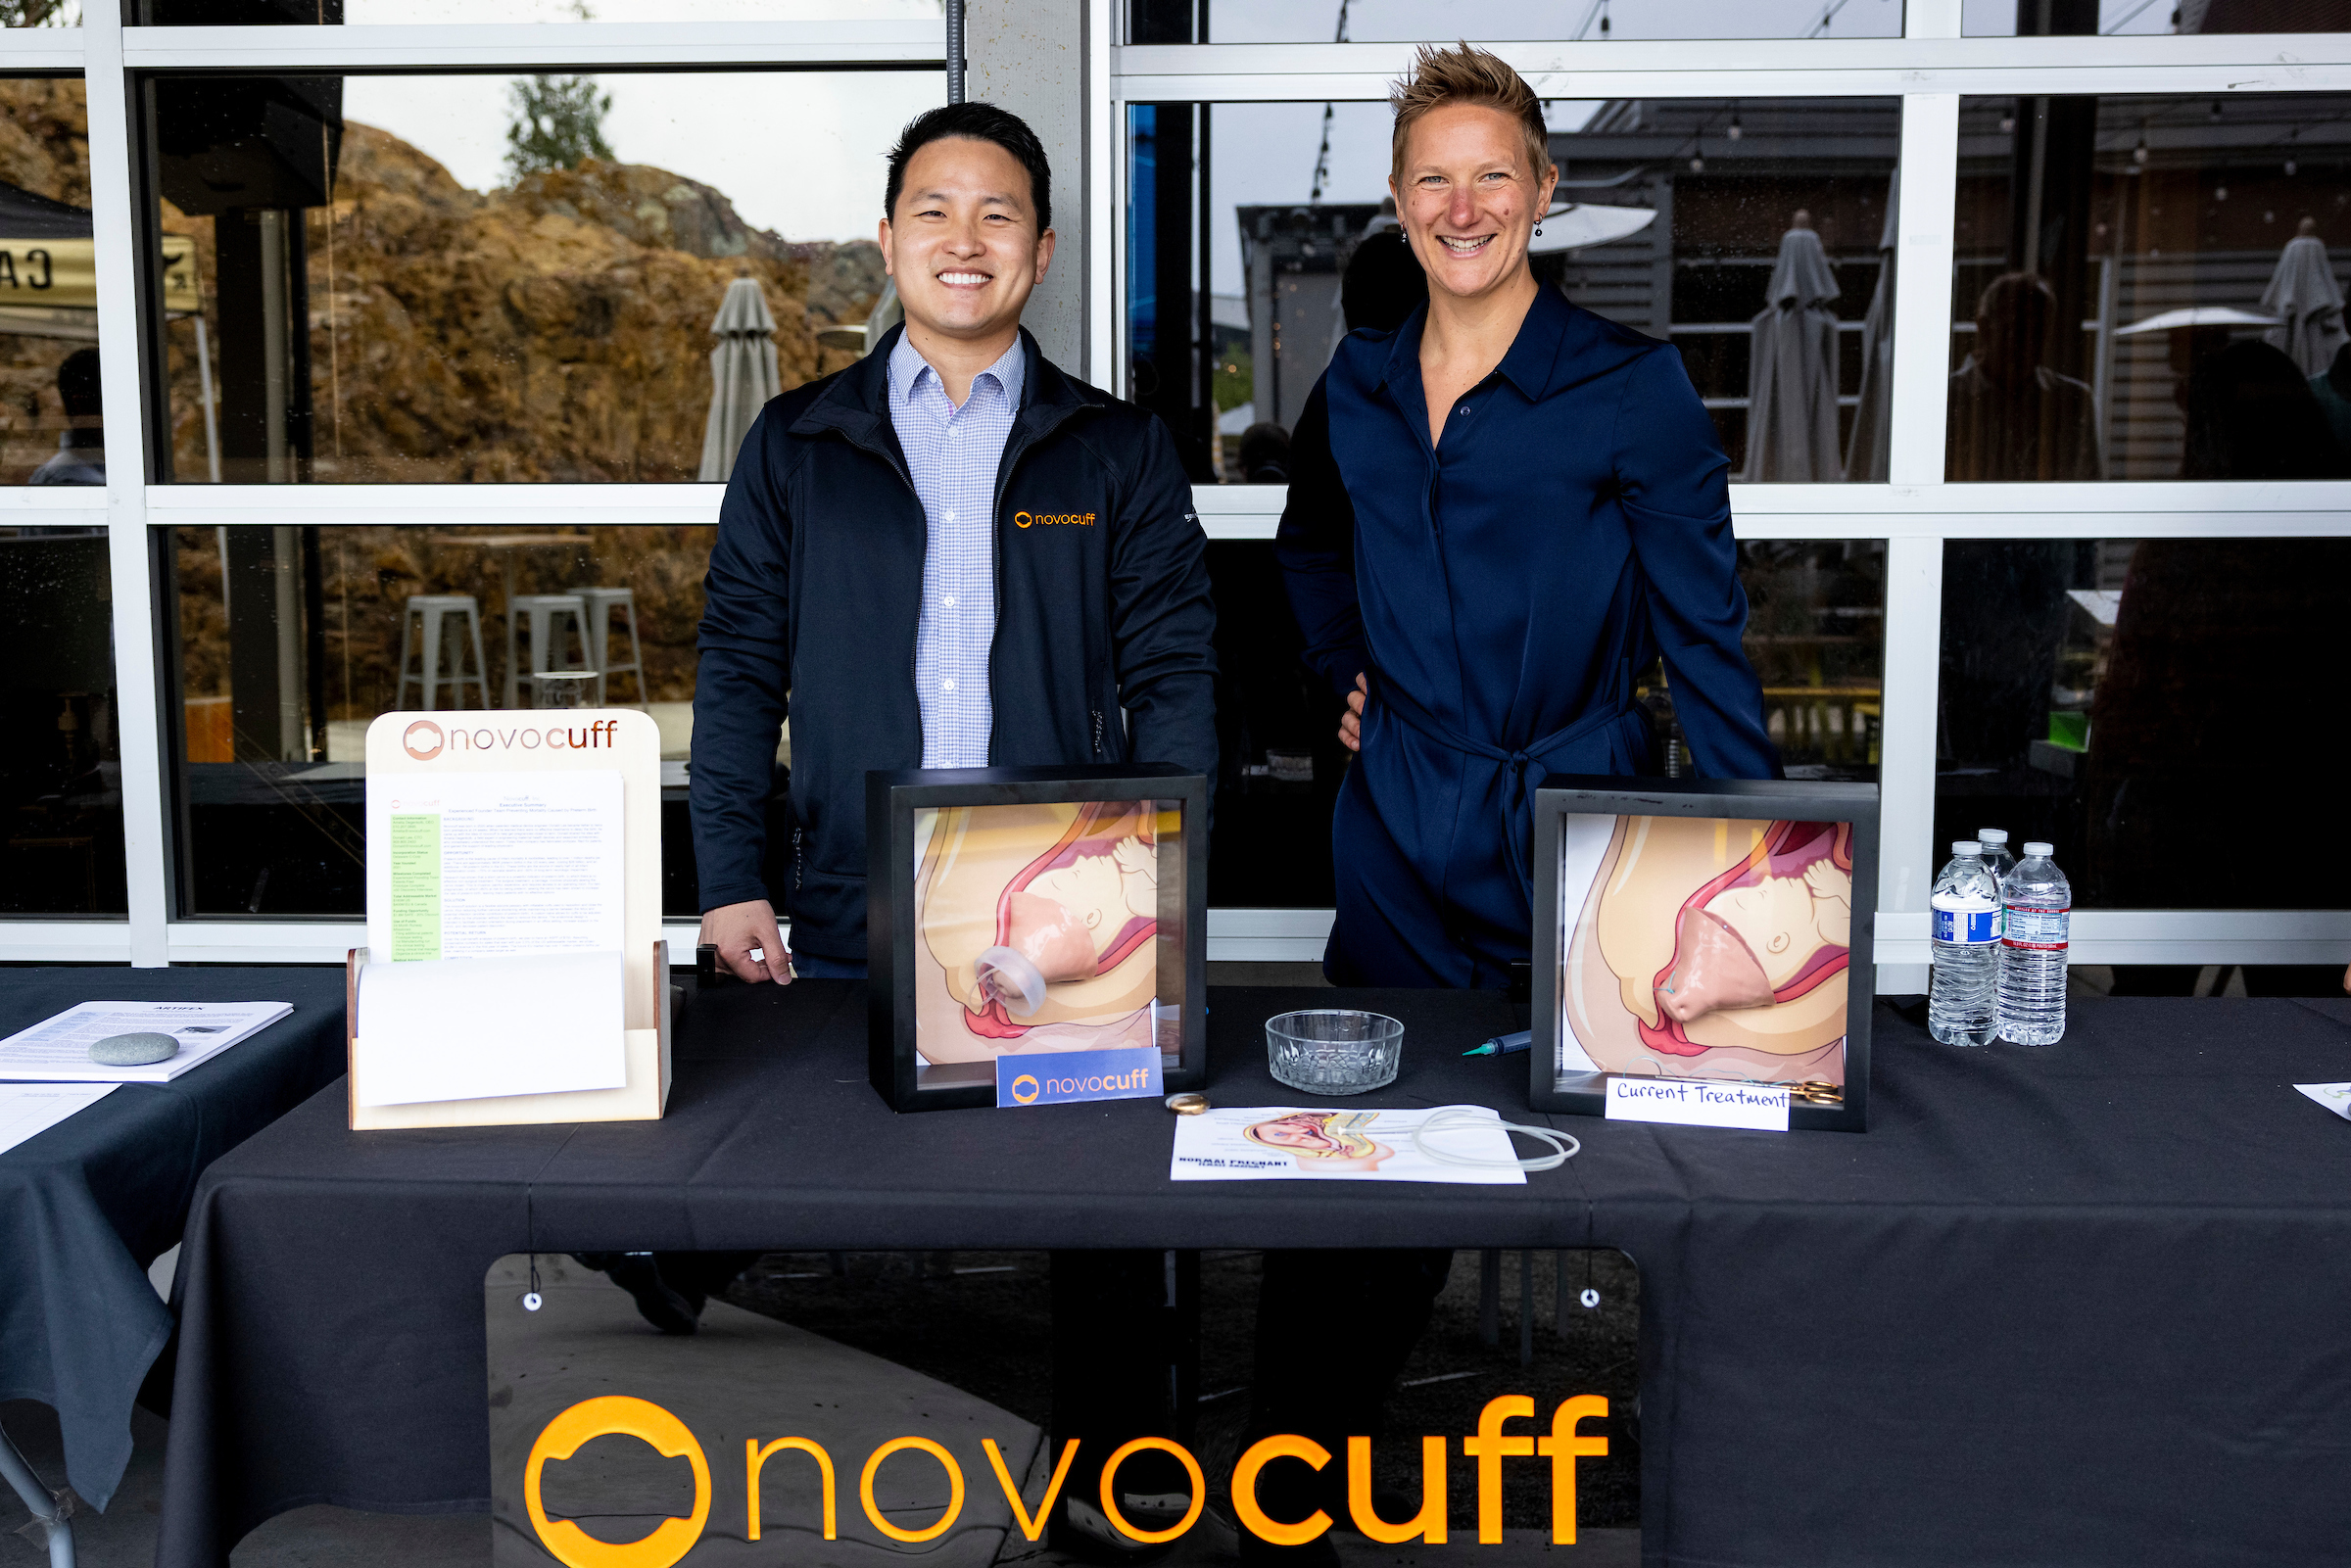 Novocuff co-founders Donald Lee (left) and Amelia Defenkolb (right) stand behind a table with images of a fetus in danger of preterm birth with Novocuff's product versus without, as well as their company's logo.